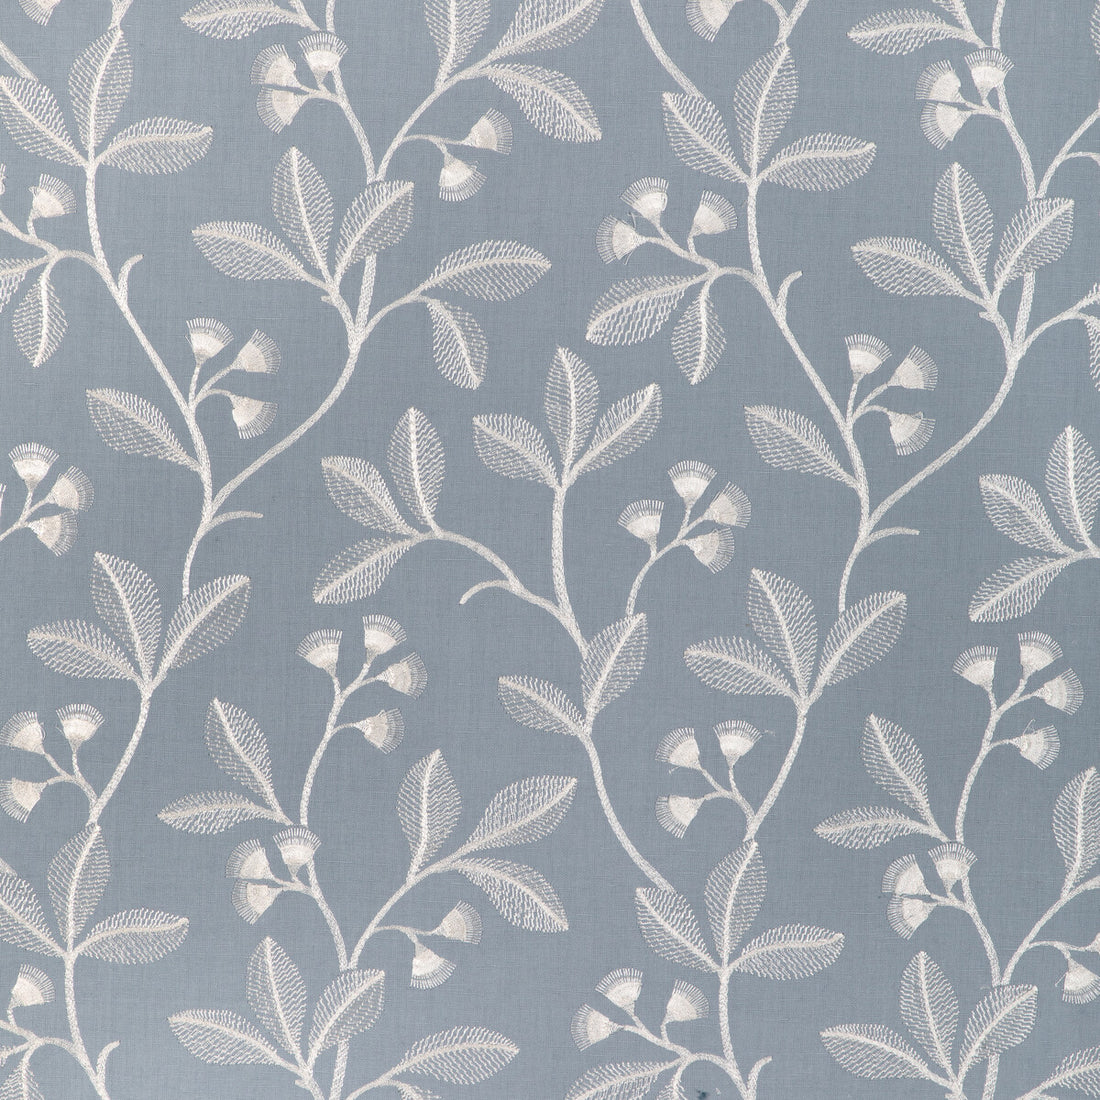 Iris Embroidery fabric in blue color - pattern 2023144.5.0 - by Lee Jofa in the Garden Walk collection